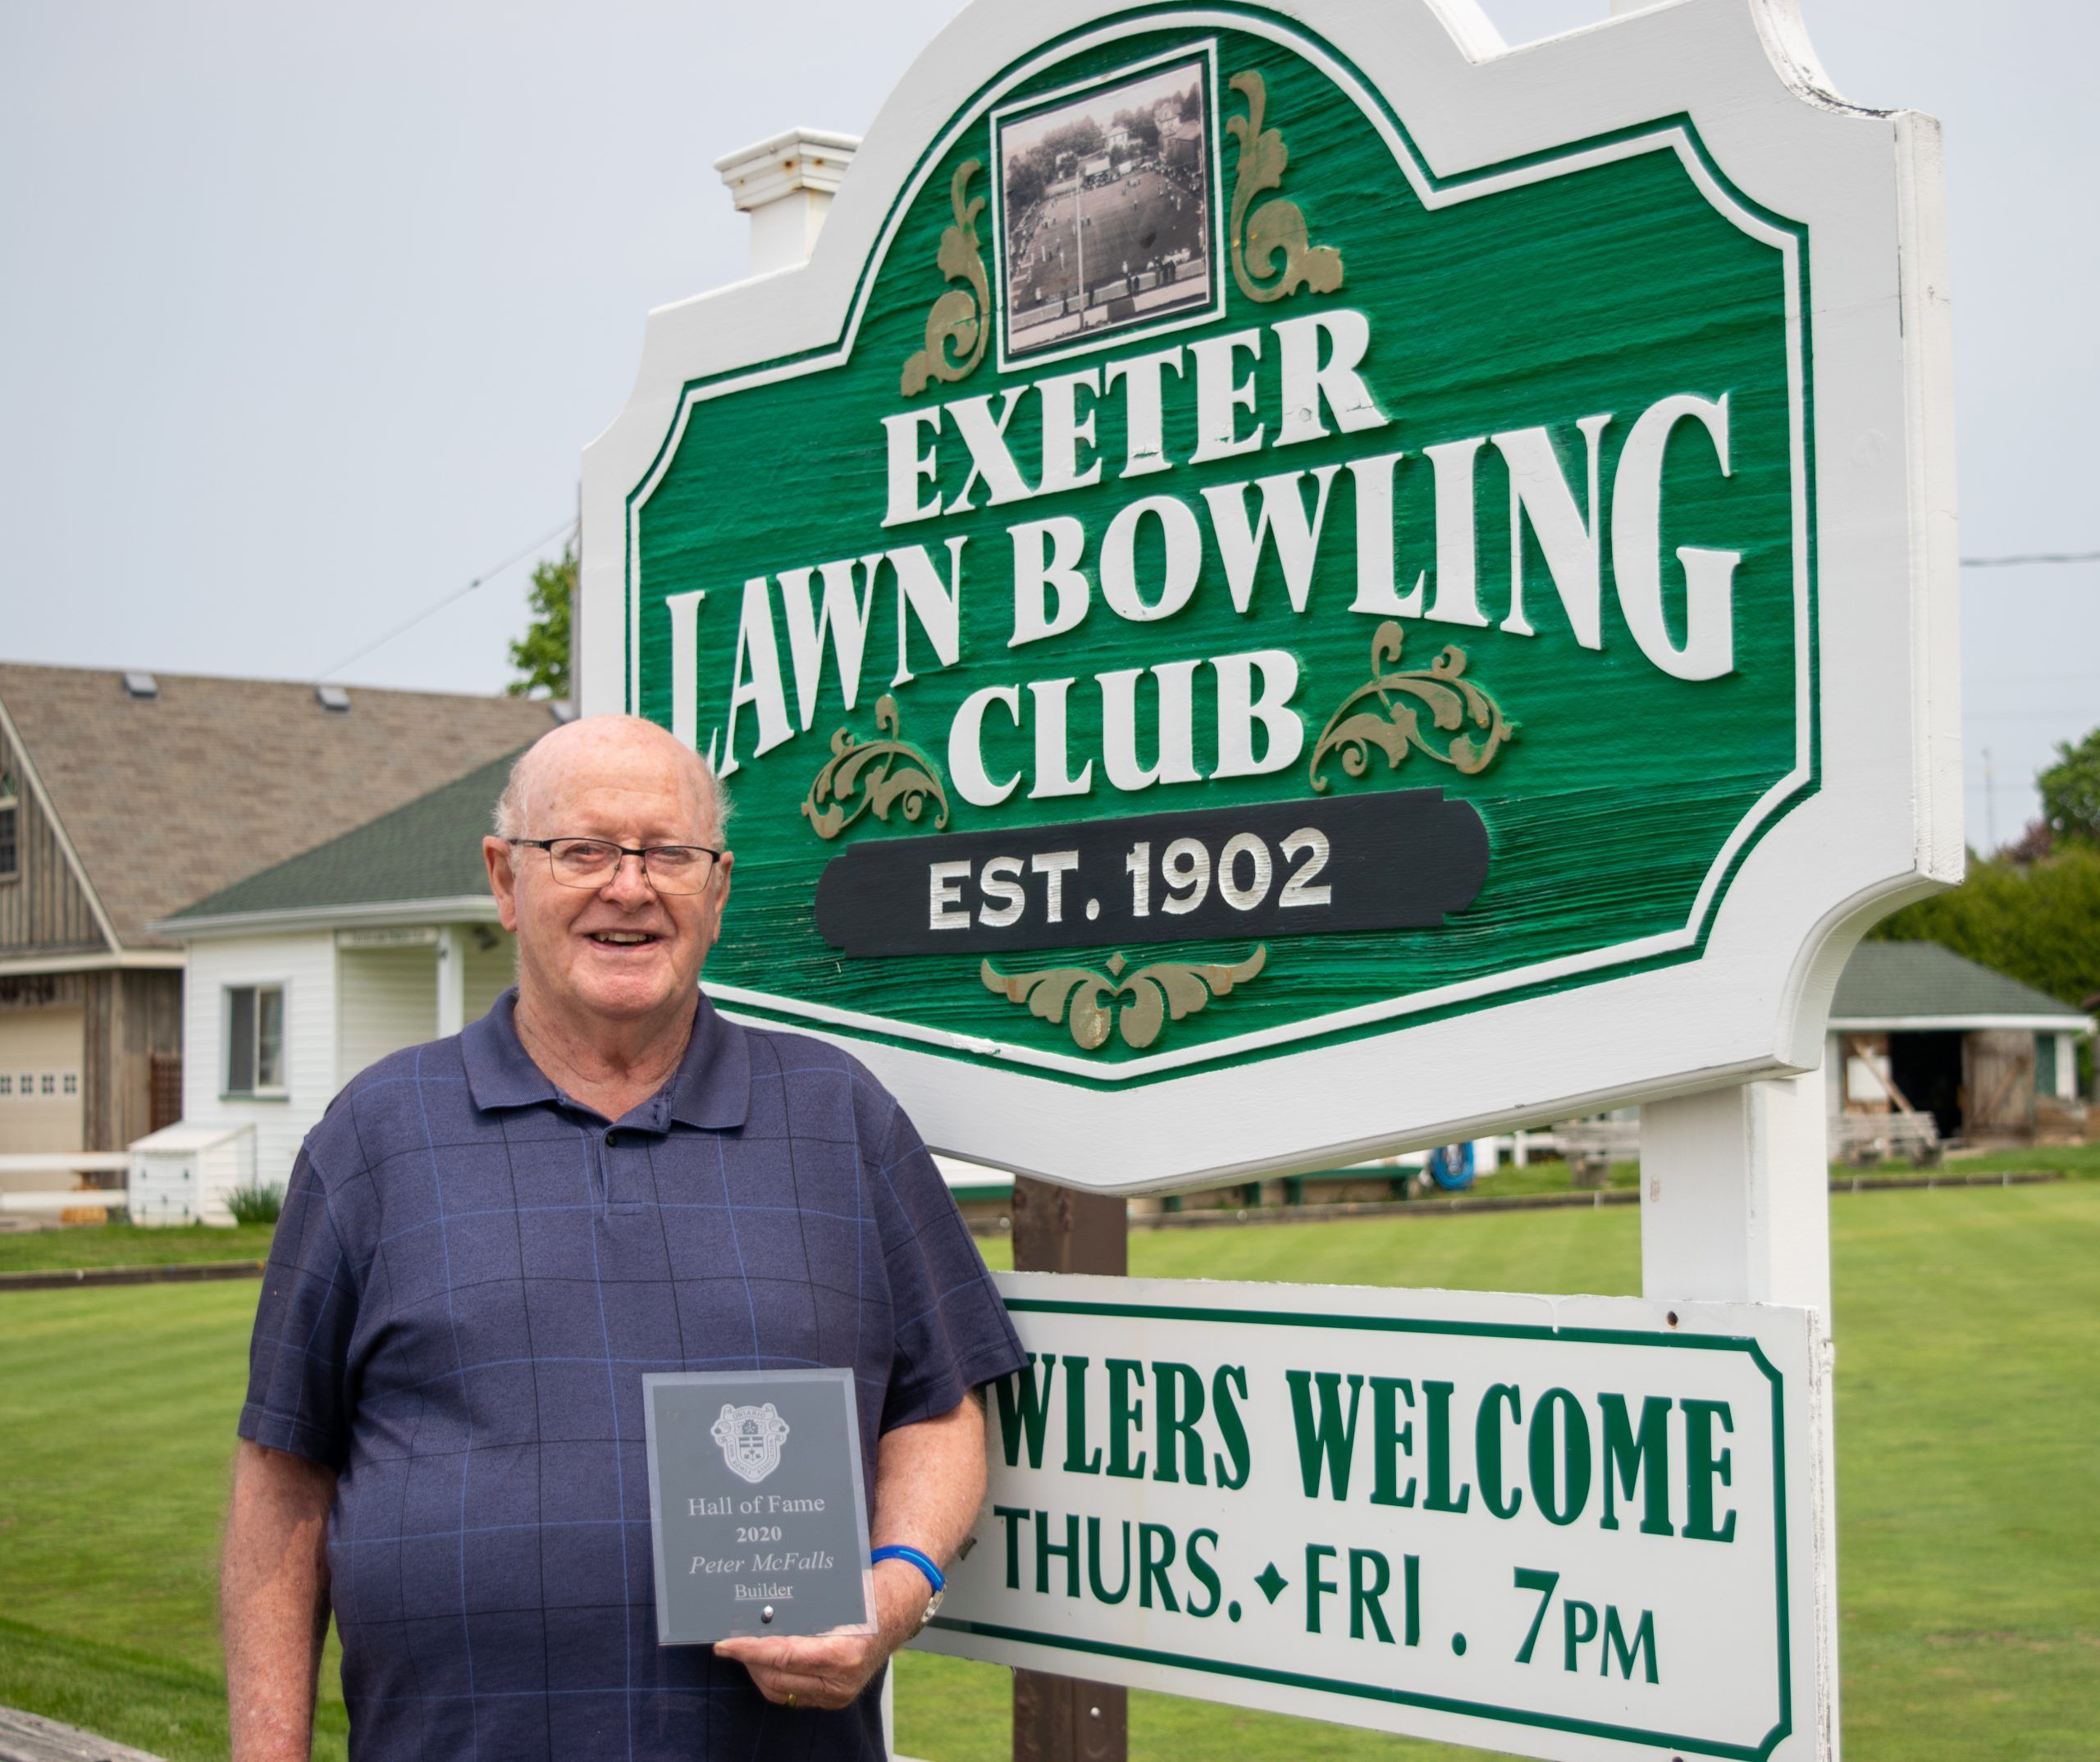 Exeter lawn bowler Peter McFalls inducted into Hall of Fame